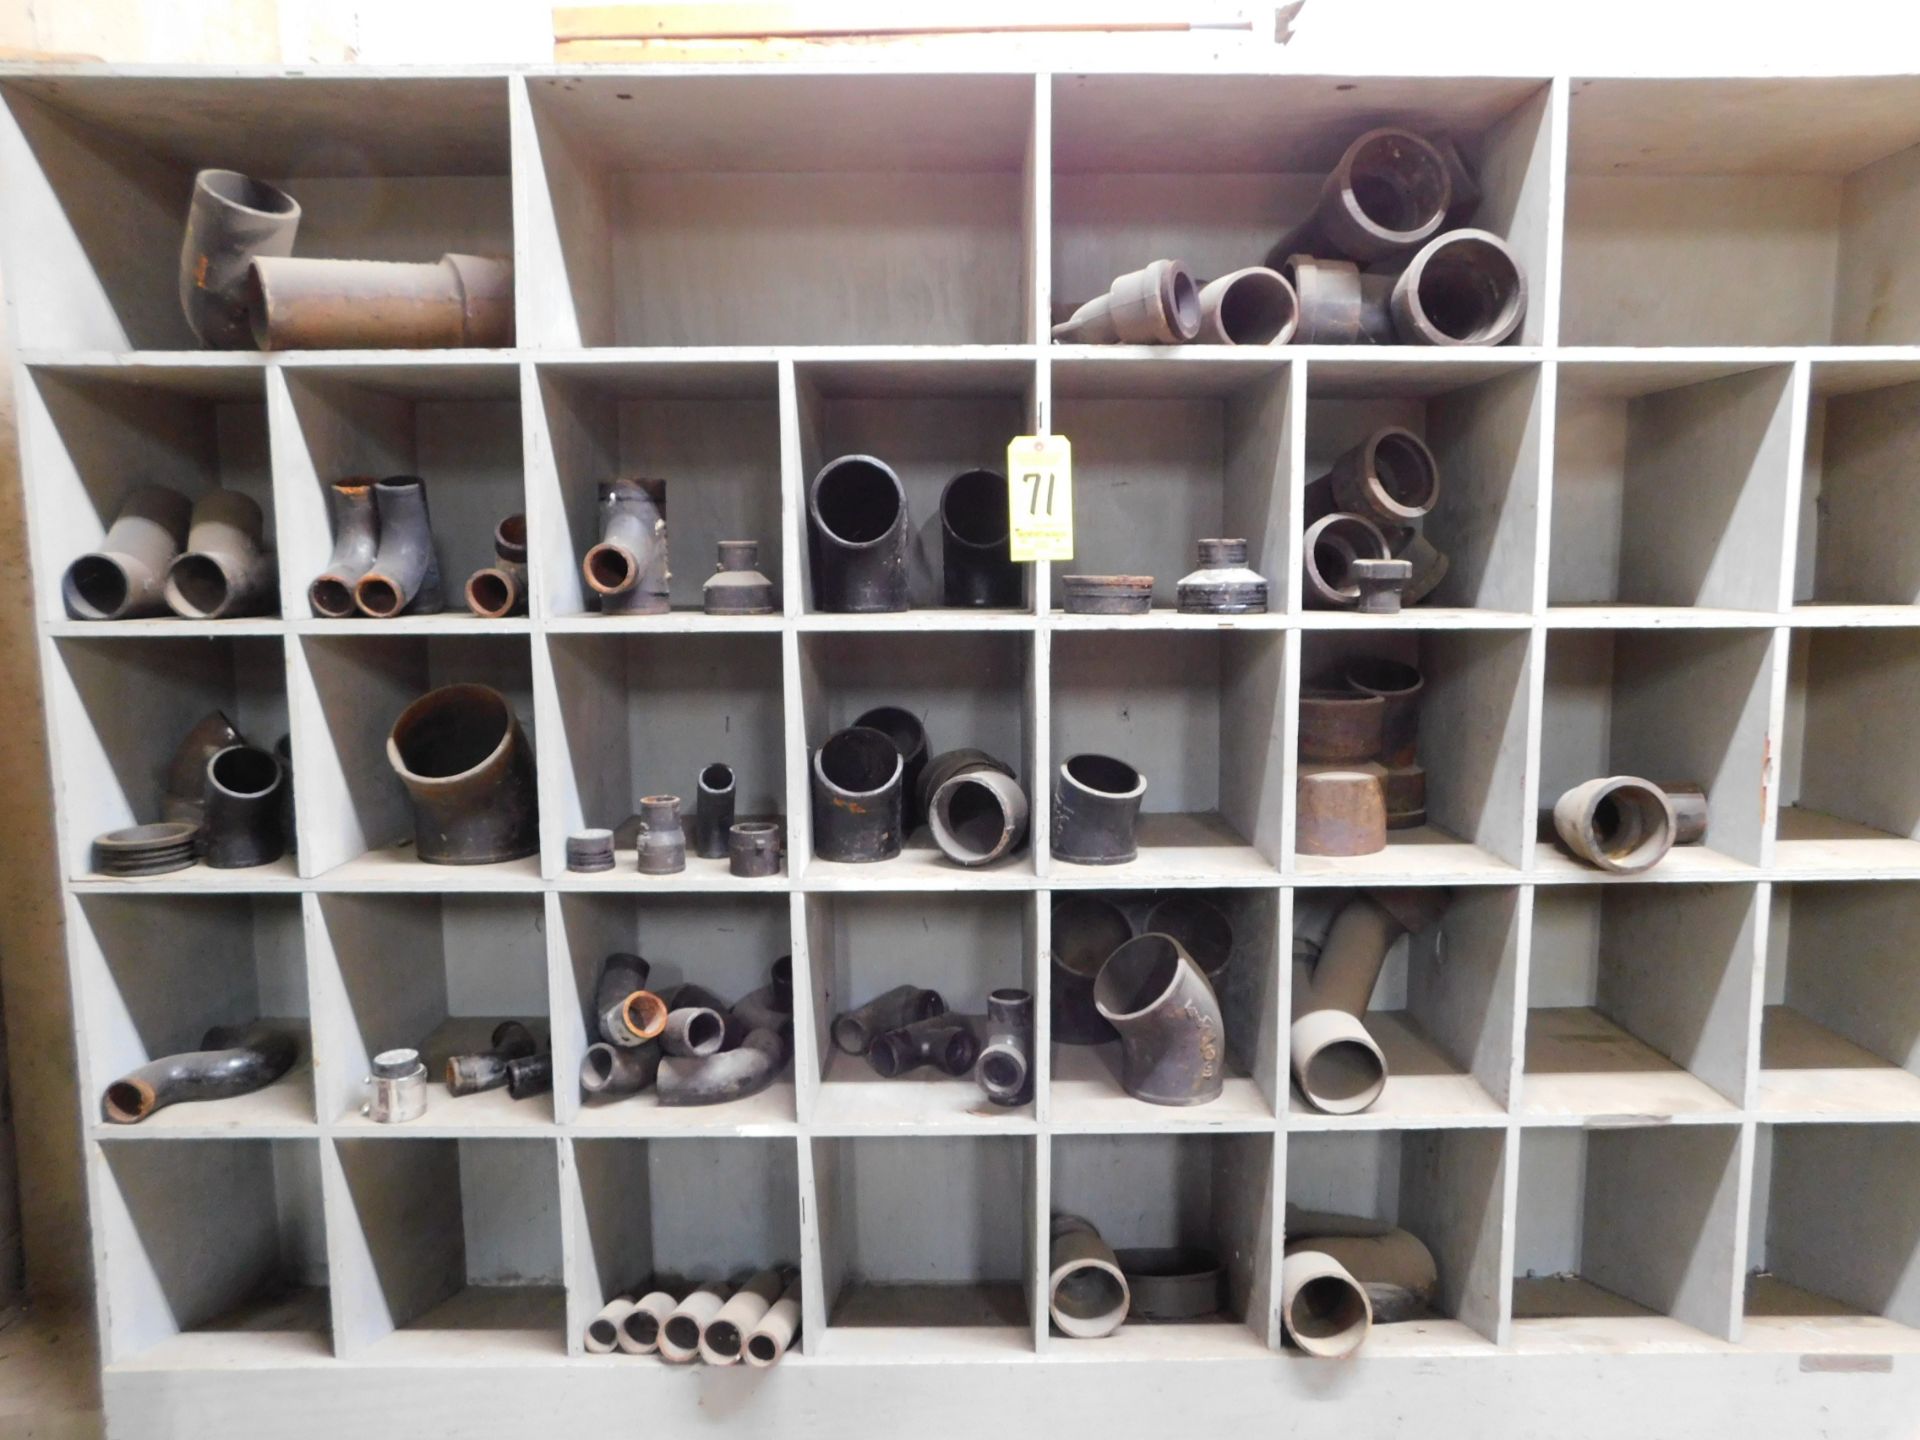 Contents of Wooden Shelving - Black Pipe Fittings, Toolboxes, Saw Horse Legs